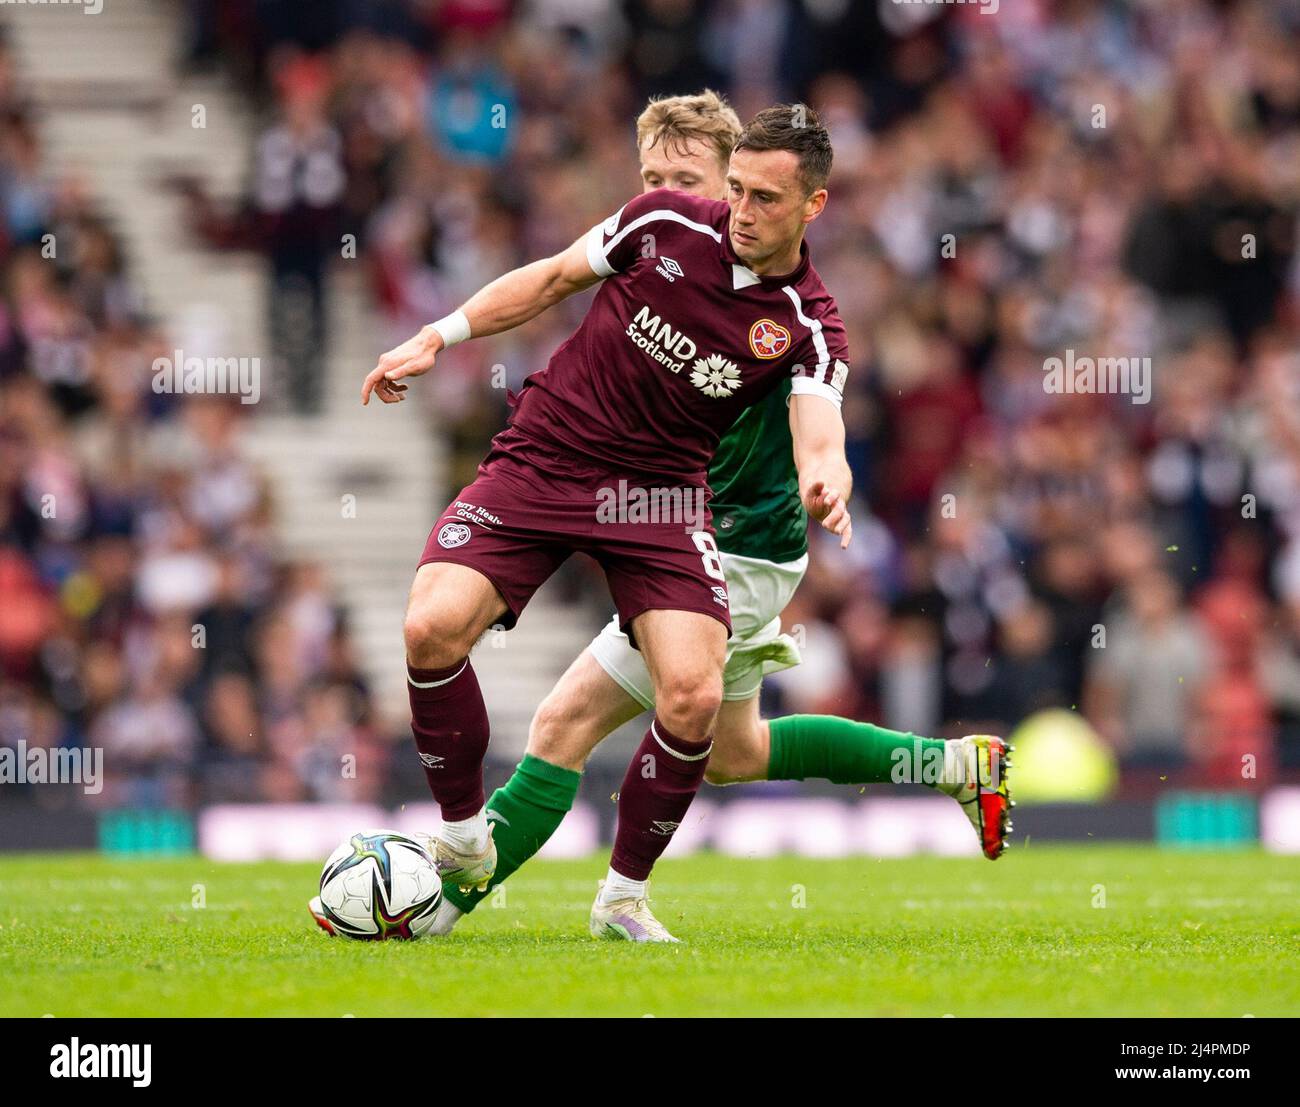 Glasgow, UK. 07th Apr, 2022. Scottish Cup semi final - Heart of Midlothian FC v Hibernian FC 07/04/2022 Pic shows: Hearts' Irish midfielder, Aaron Mceneff, gets the ball under control as Hearts take on Hibs in the Scottish Cup semi final at Hampden Park, Glasgow Credit: Ian Jacobs/Alamy Live News Stock Photo